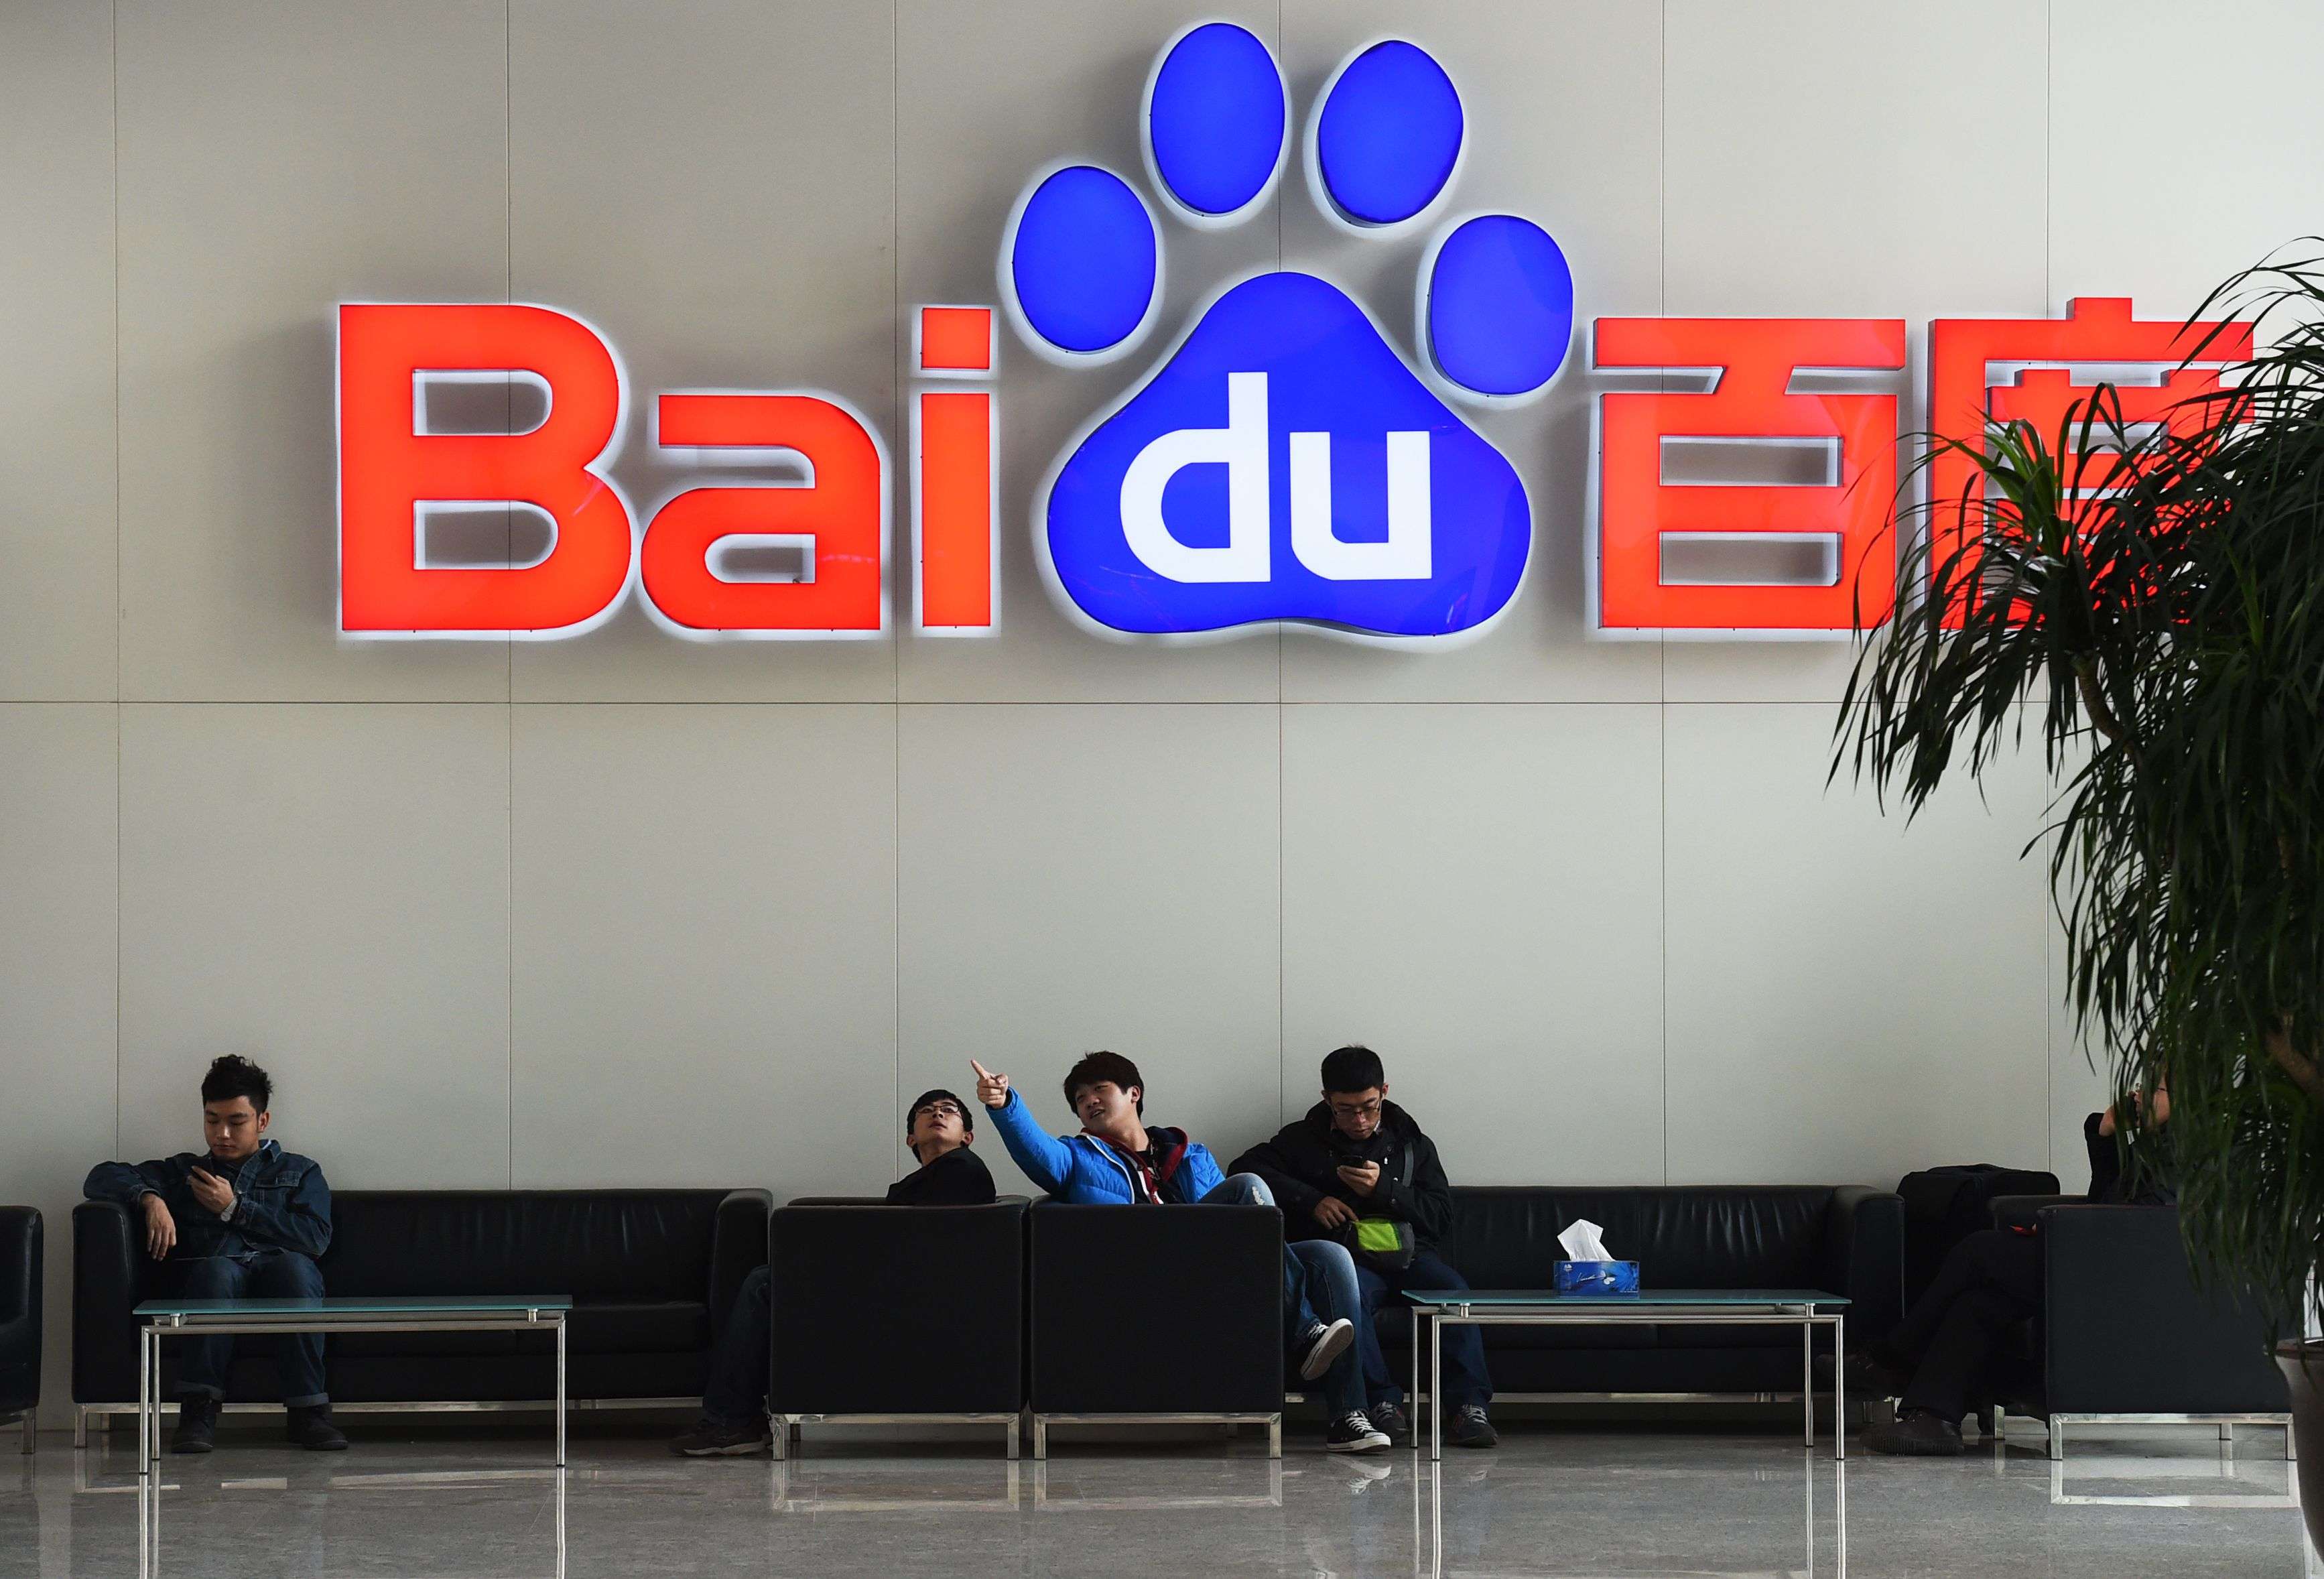 A 2014 file photos shows people sitting below a Baidu logo at the Baidu headquarters in Beijing. Photo: AFP